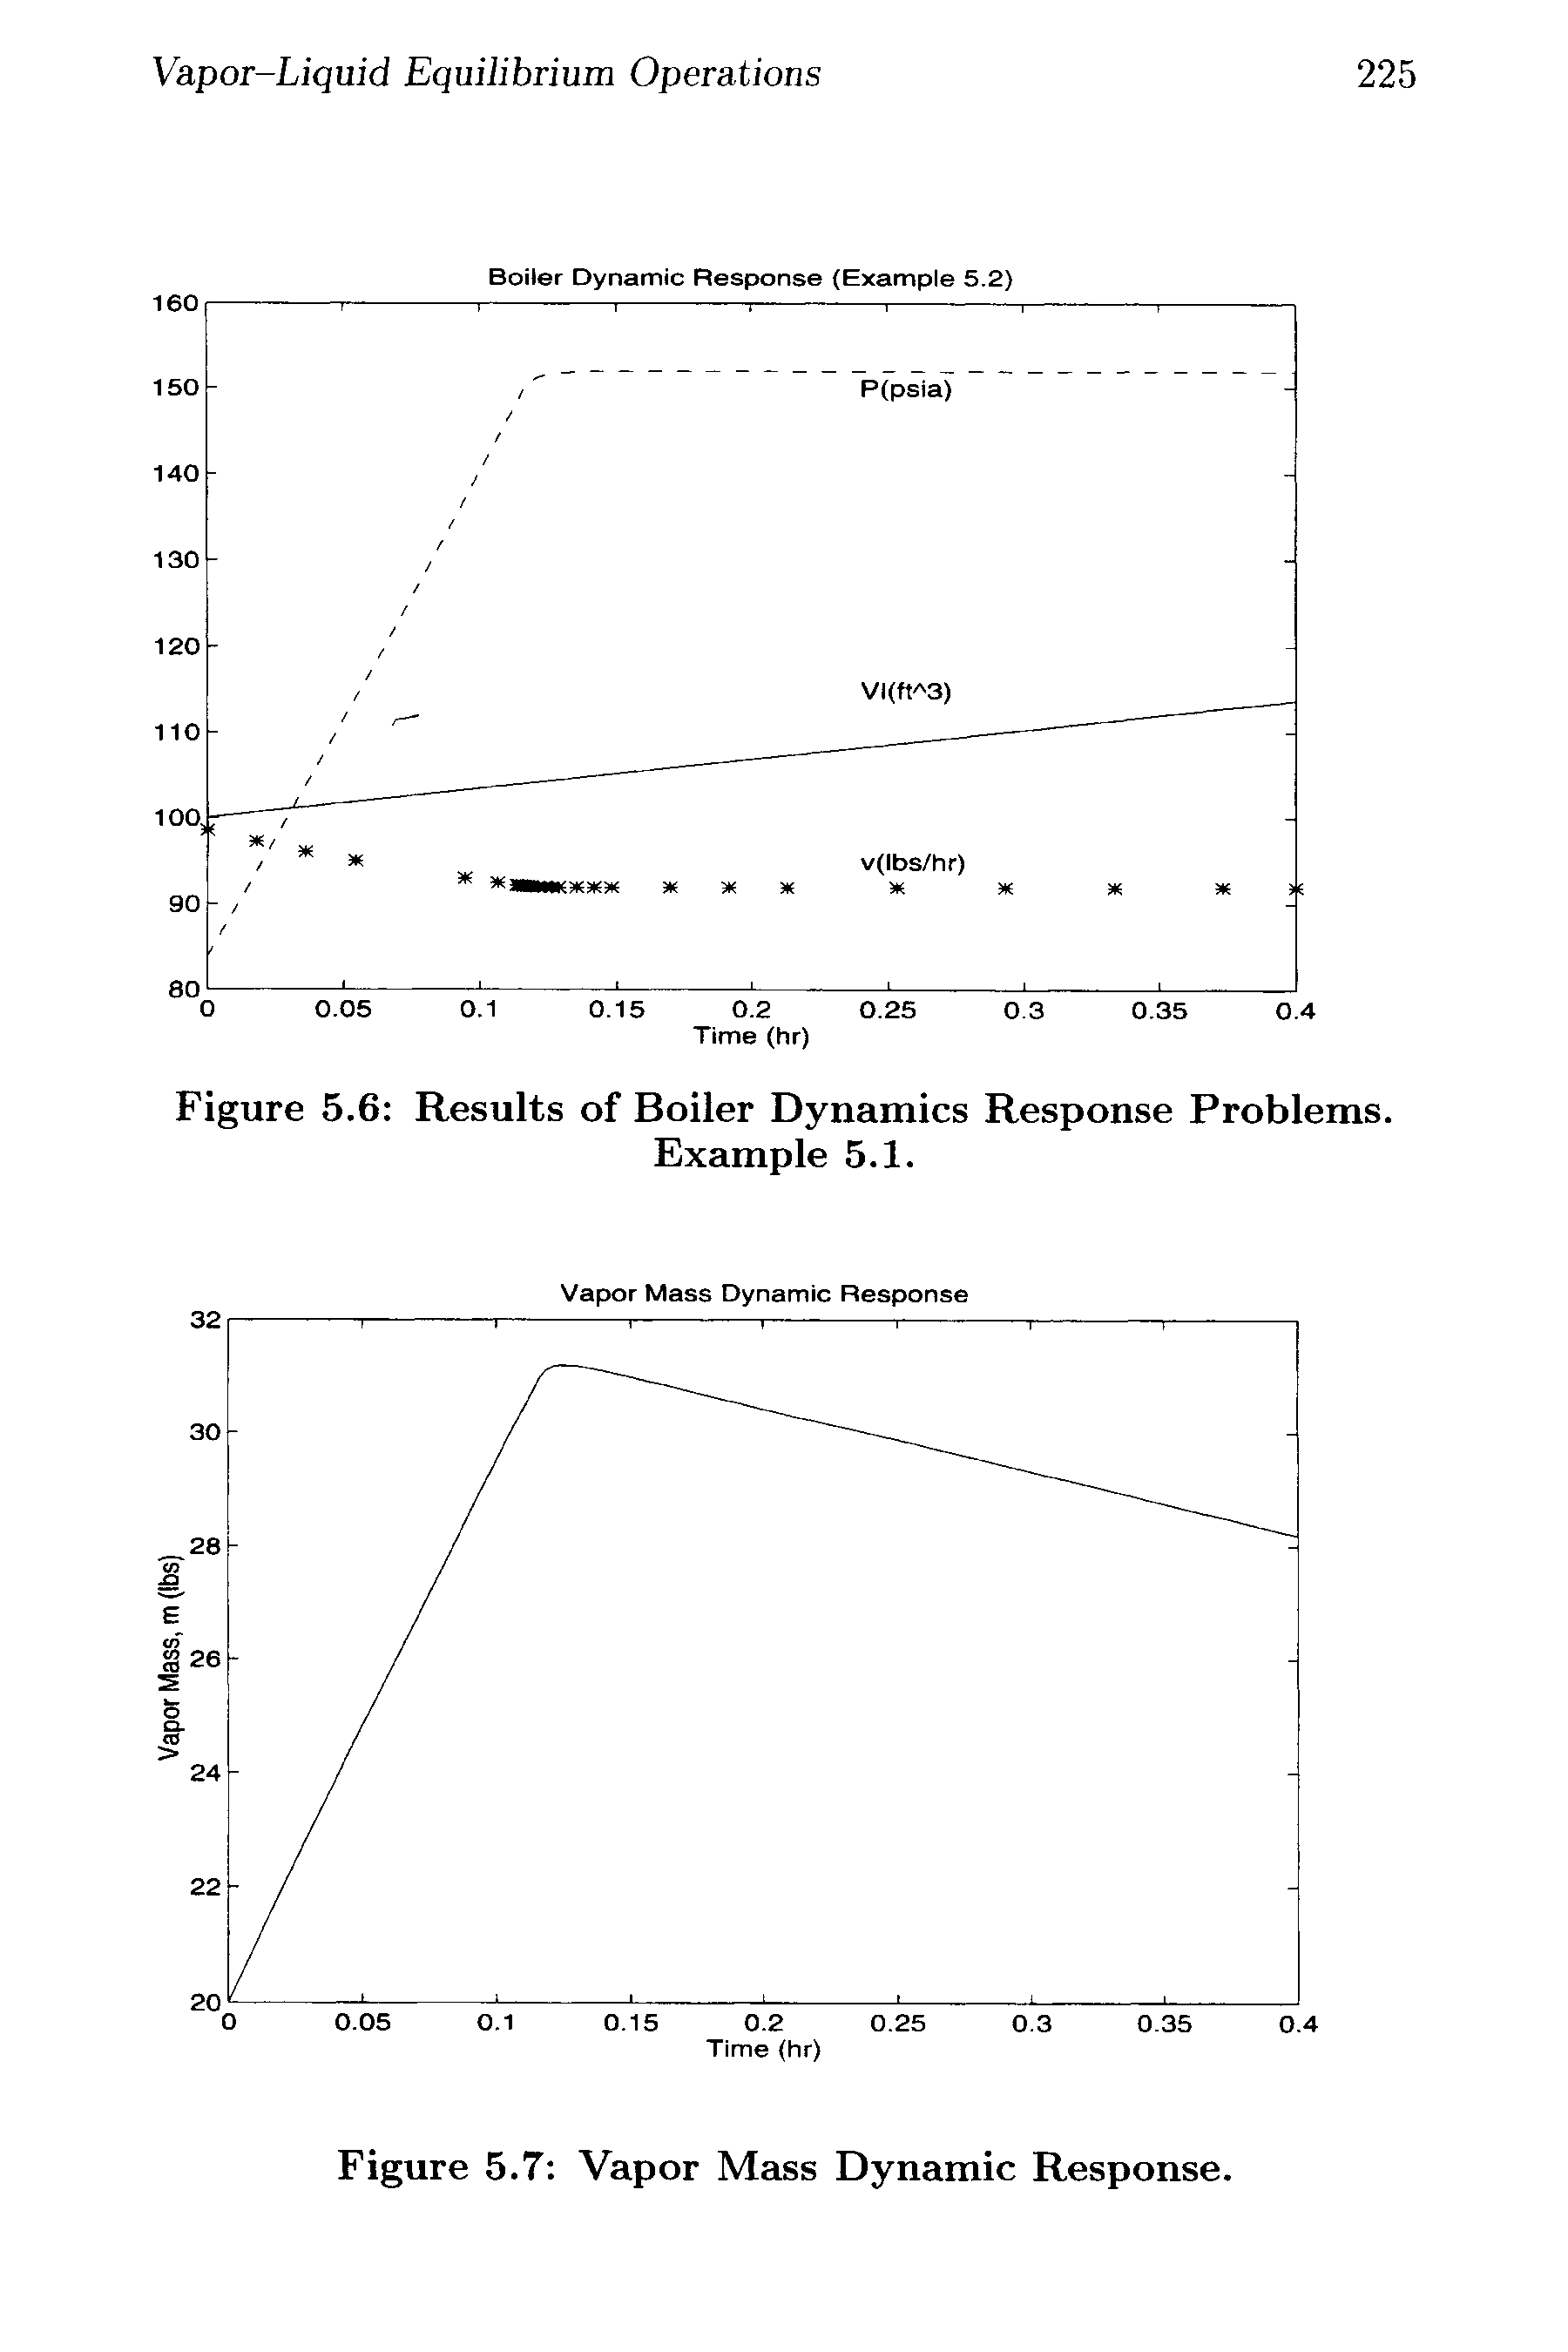 Figure 5.6 Results of Boiler Dynamics Response Problems.